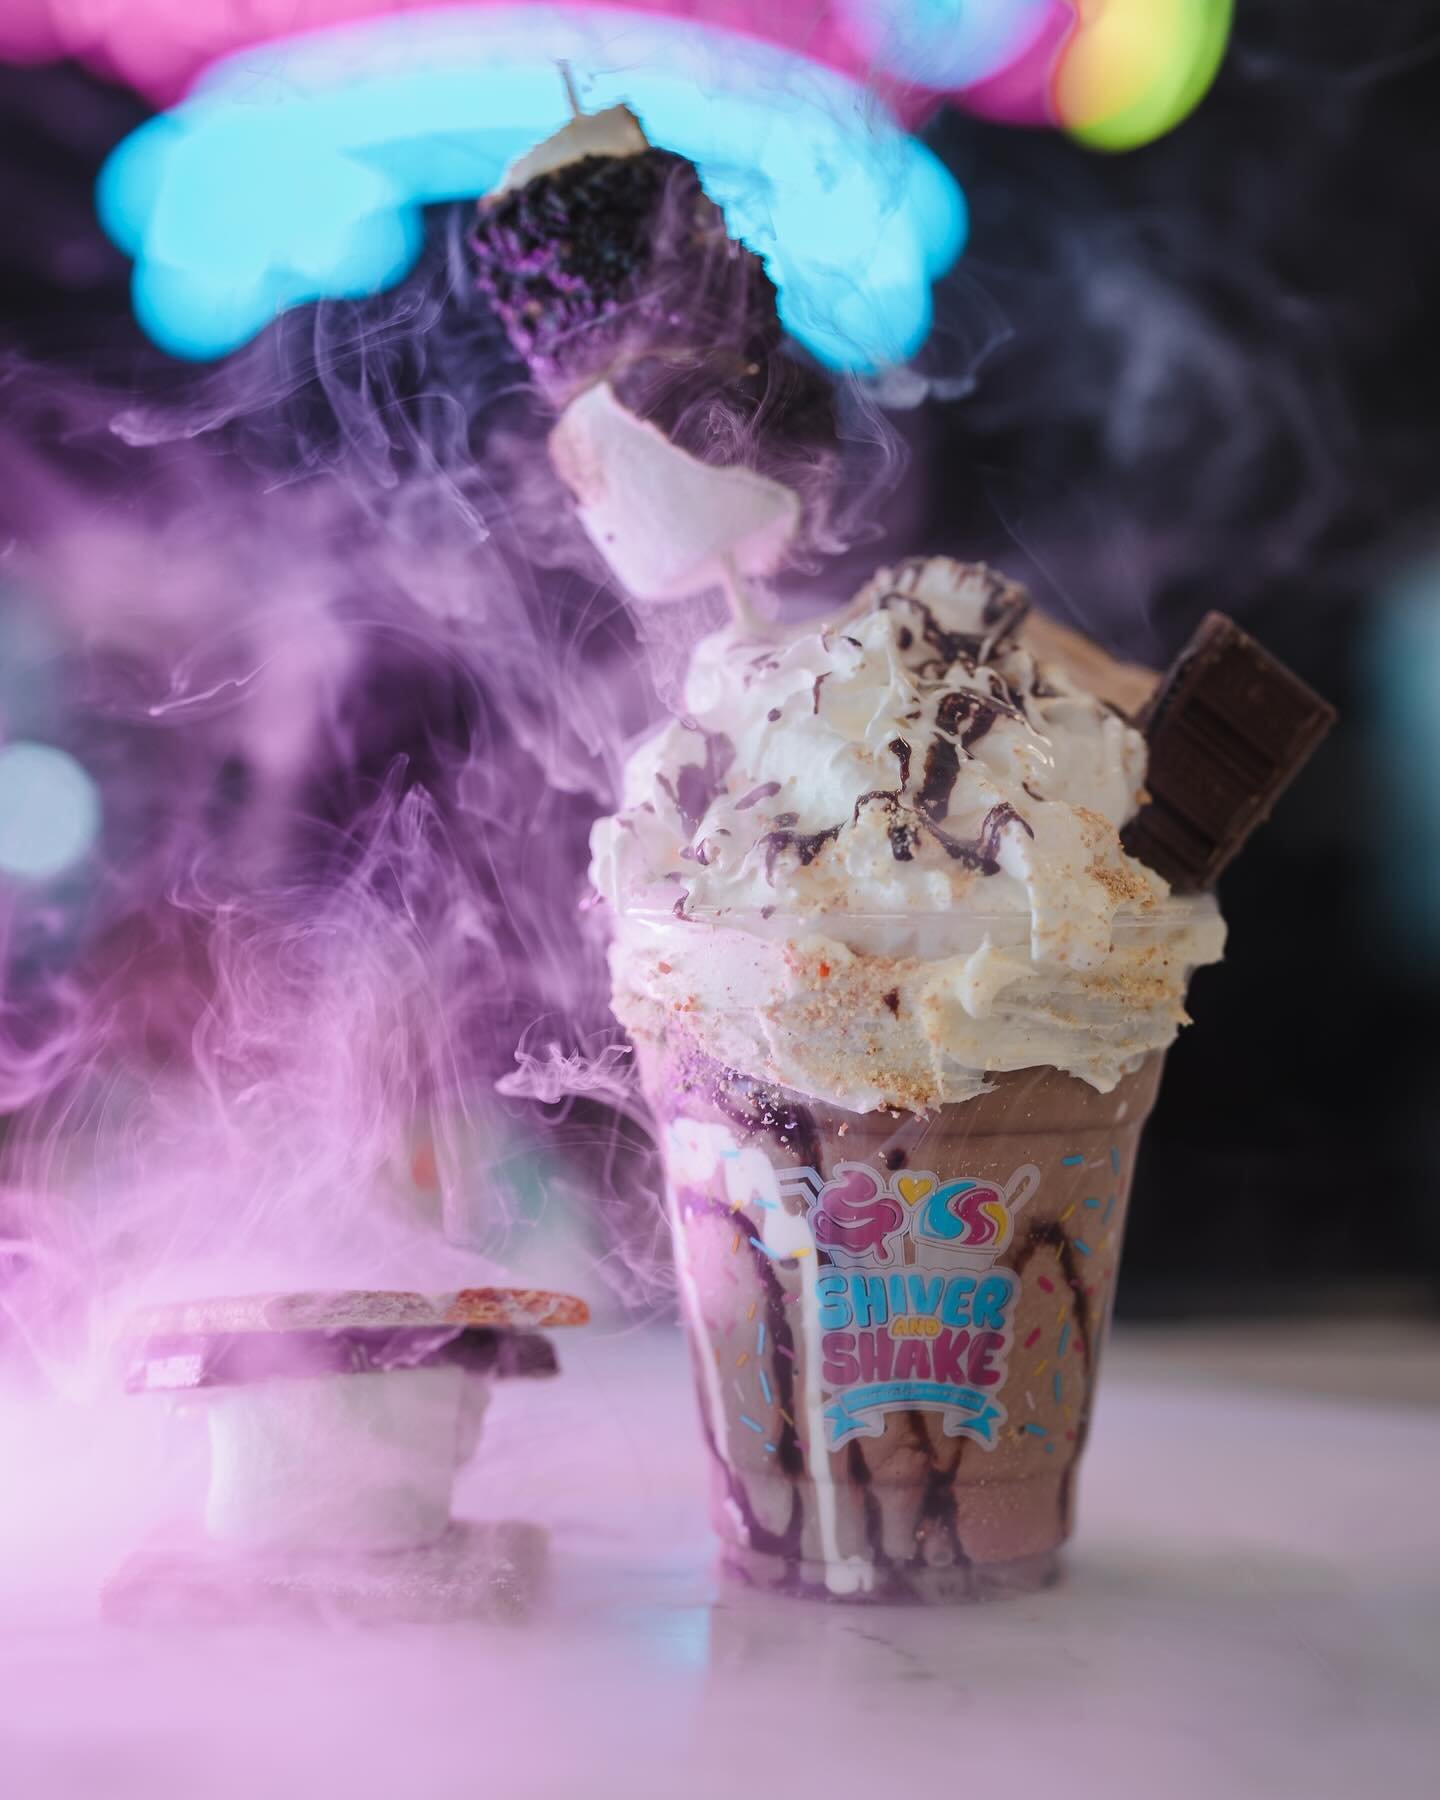 🔥🍫 Say hello to summer with our new S&rsquo;mores creations! 

🍫Our shake features Blue Bell premium chocolate ice cream blended to perfection to make the smoothest milkshake your taste buds have ever tried

❄️ Our shaved ice boasts the softest ic